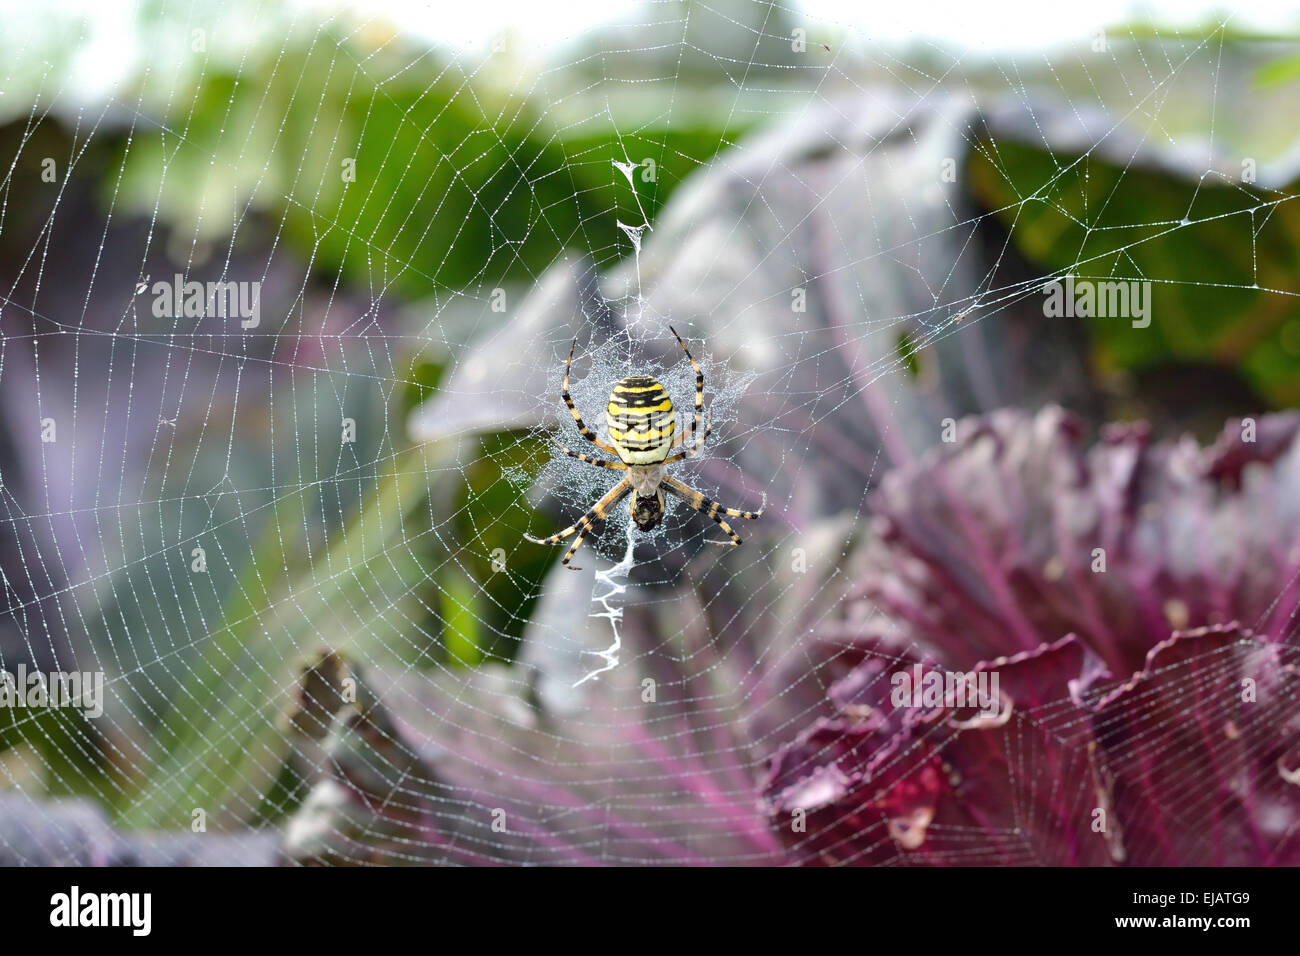 Wasp spider with her web Stock Photo